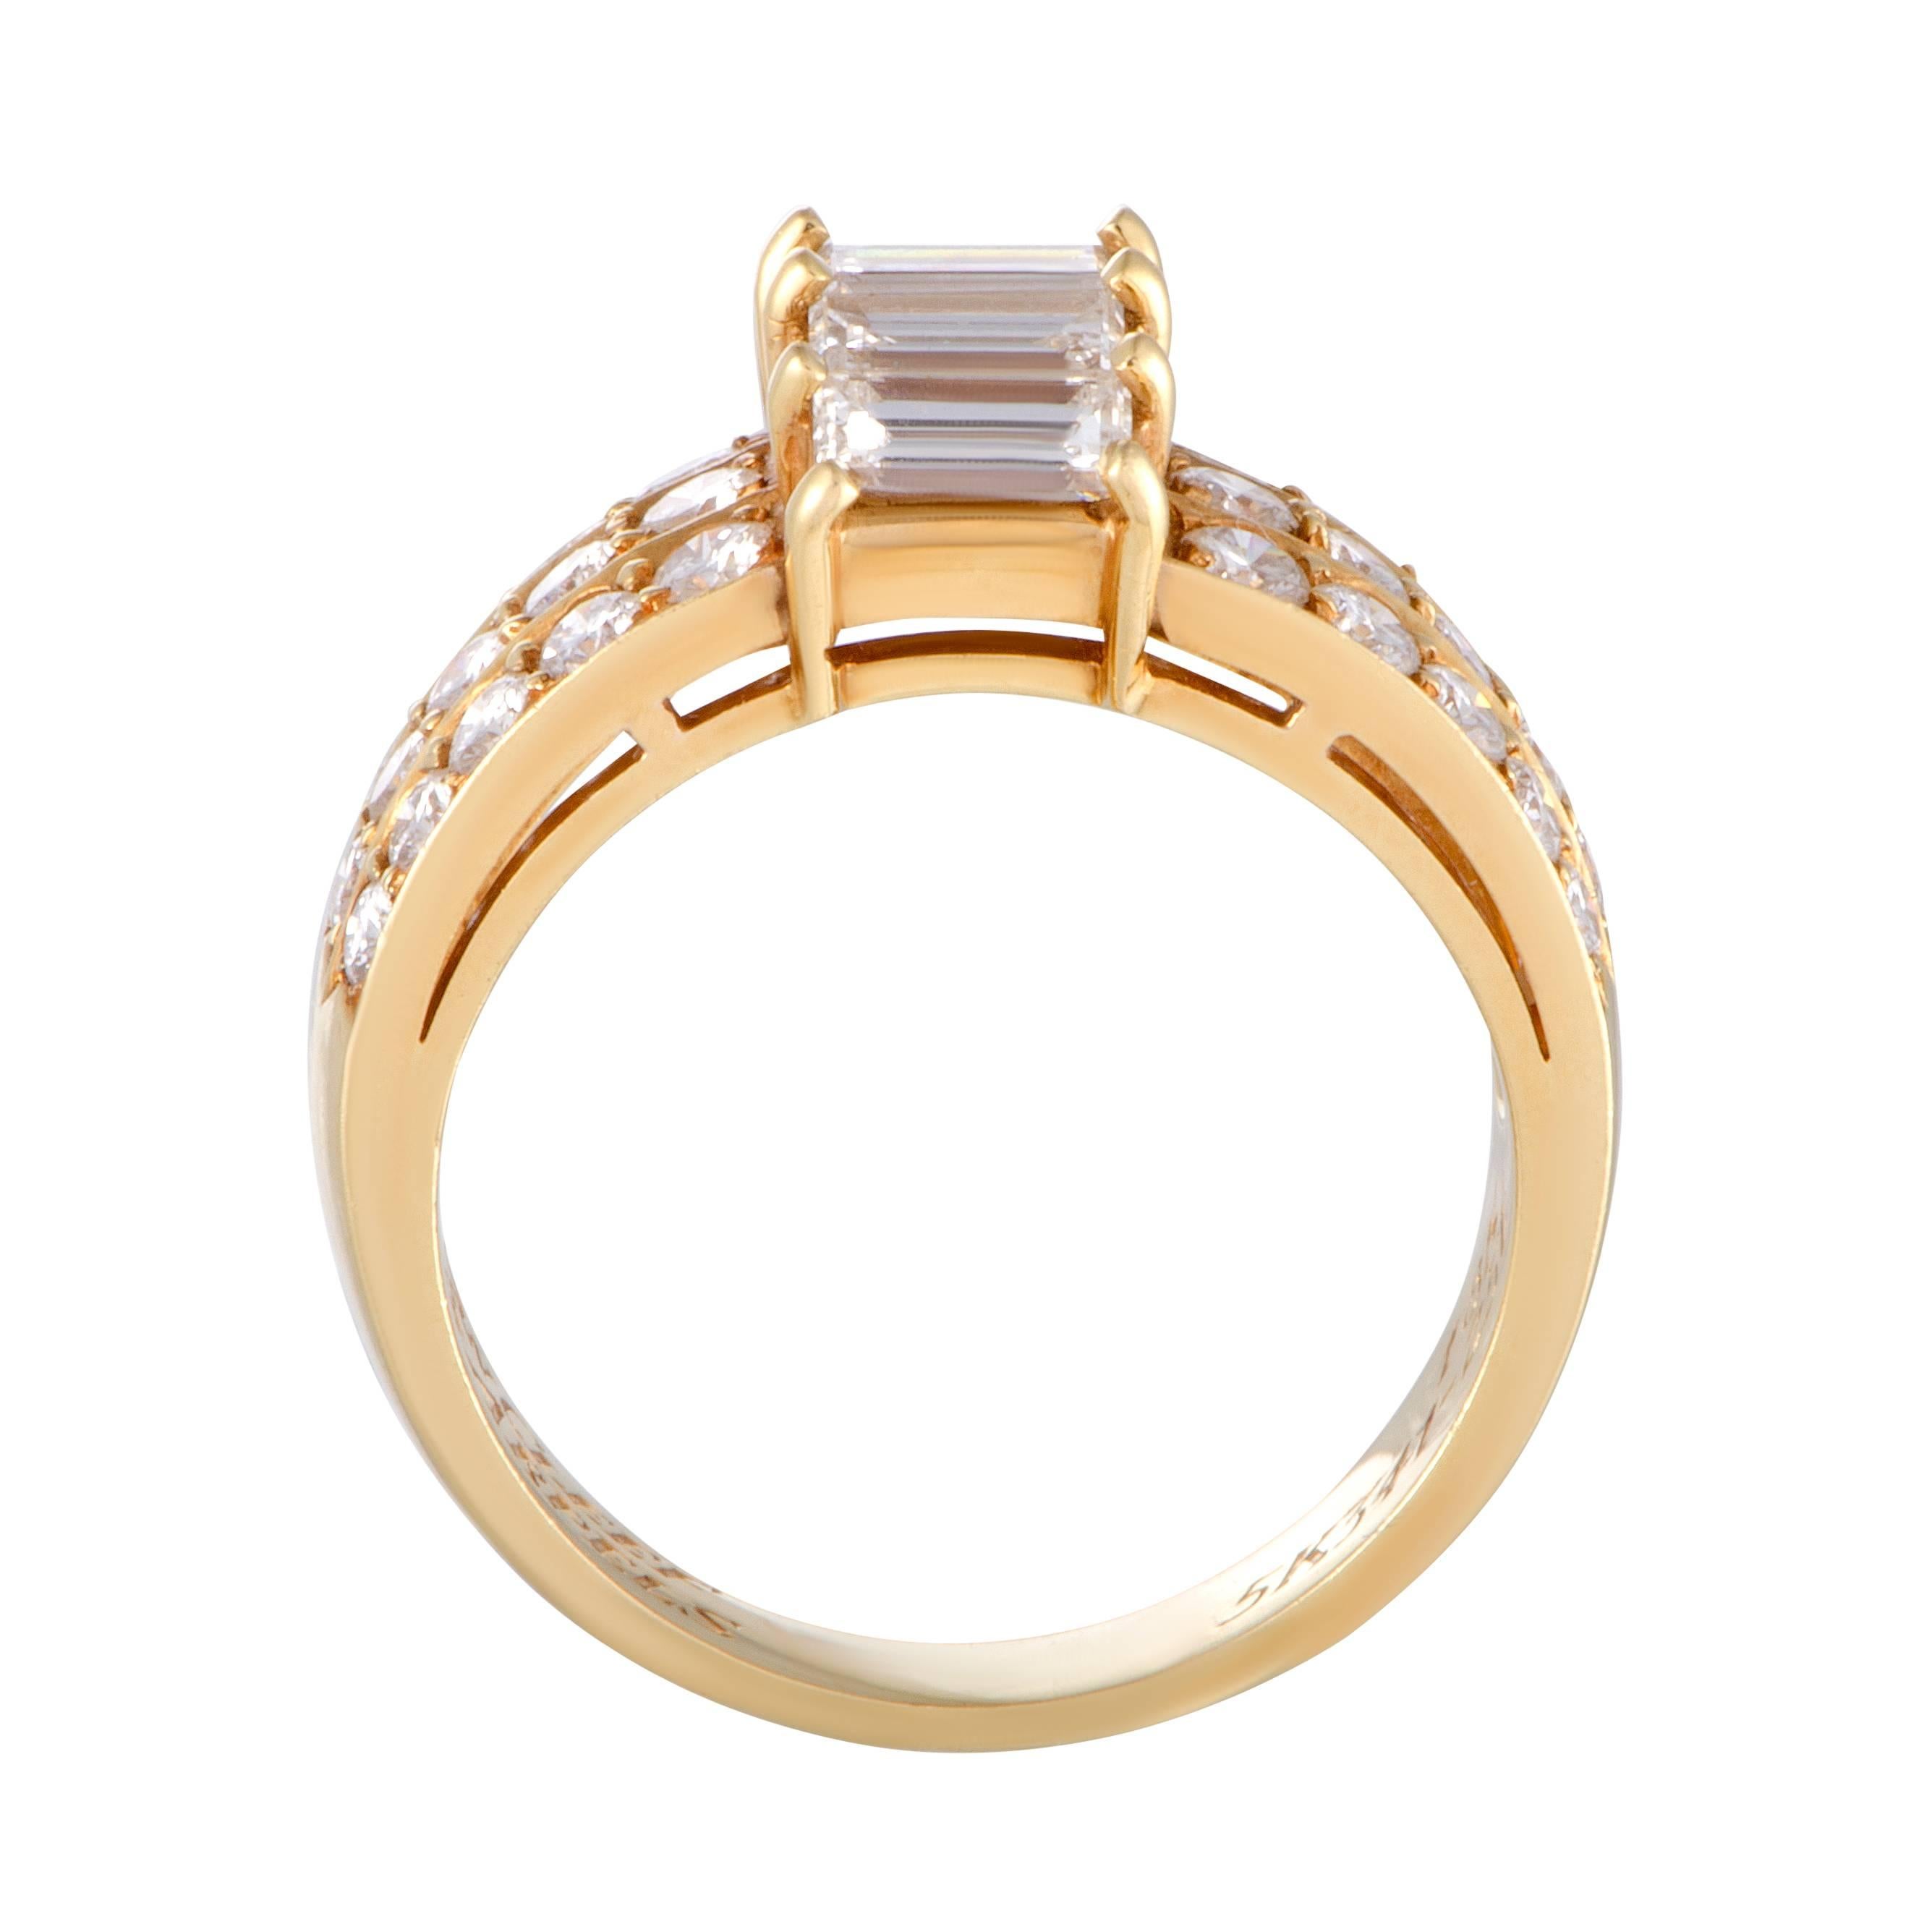 Exquisitely crafted from the ever-luxurious 18K yellow gold and lavishly set with glamorously resplendent diamond stones, this spectacular ring exudes extravagance and refinement. The ring is a Van Cleef & Arpels design and boasts a total of